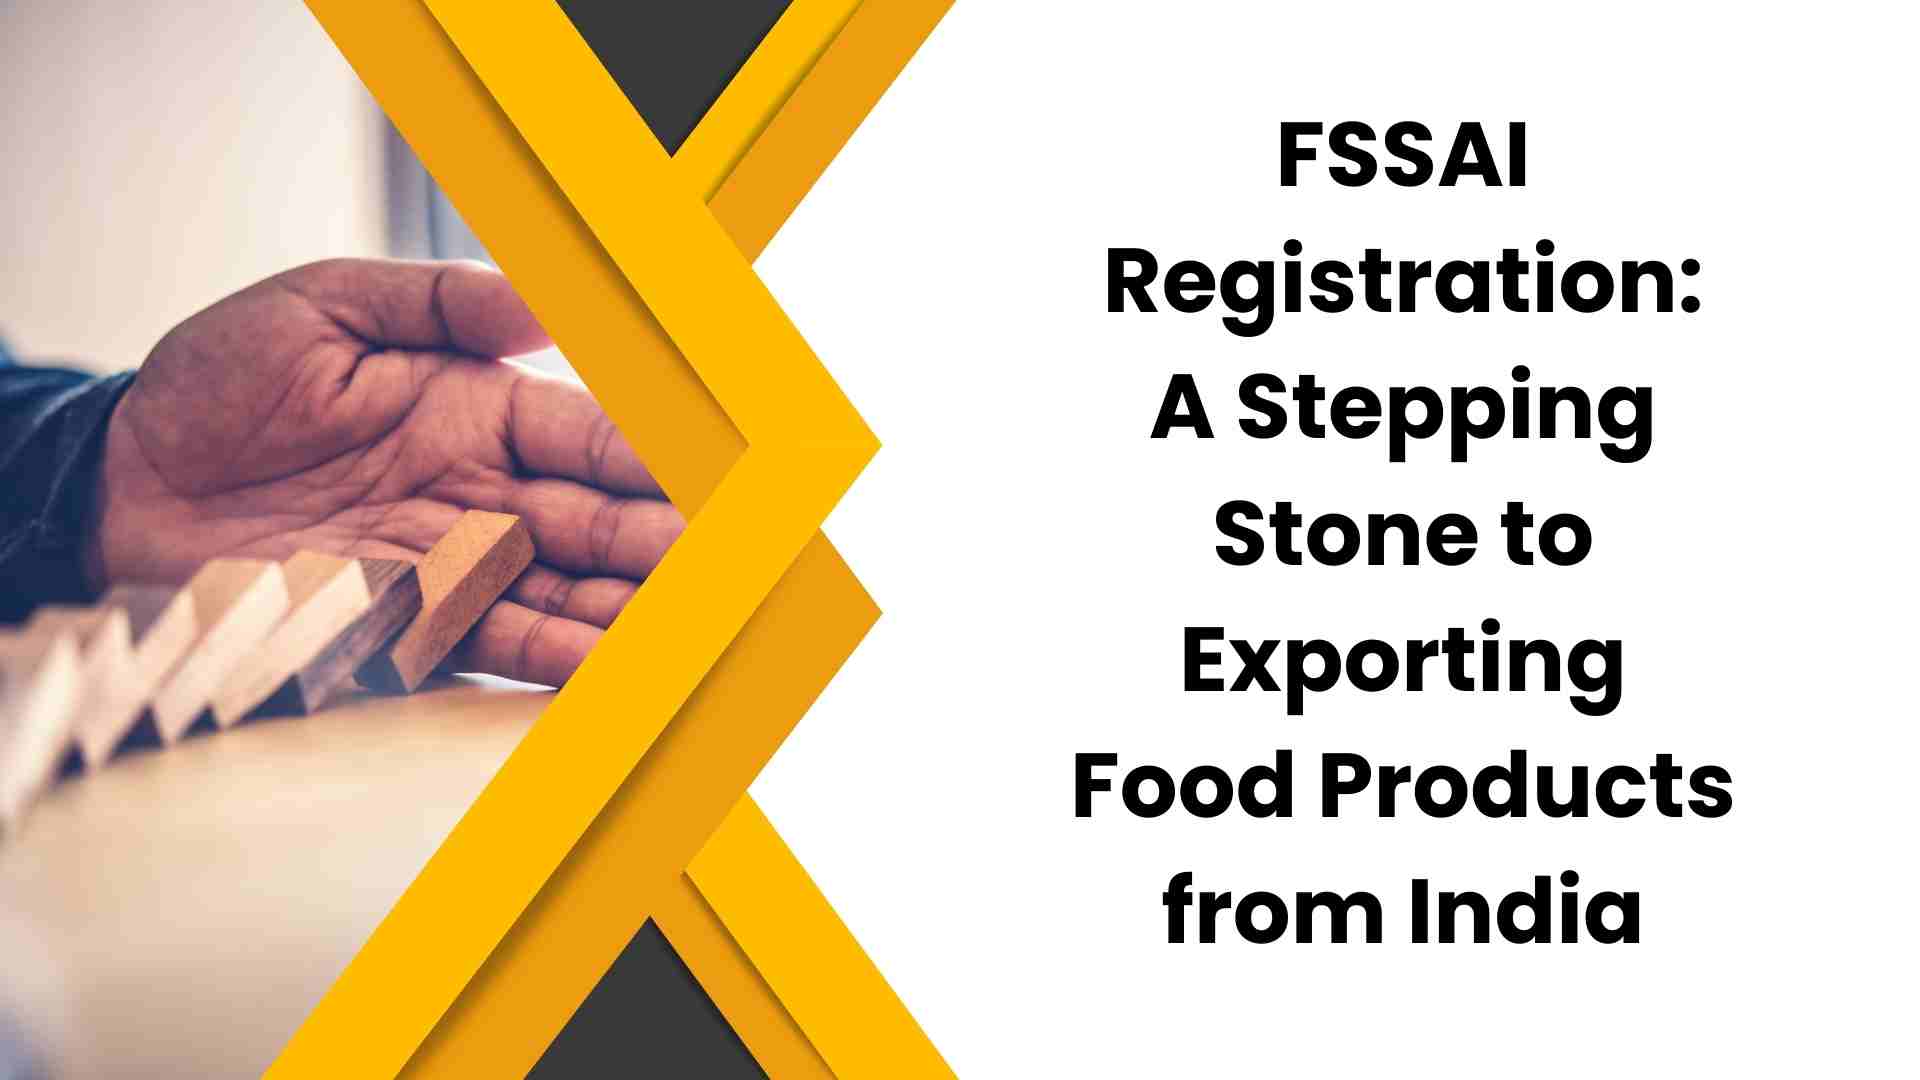 FSSAI Registration A Stepping Stone to Exporting Food Products from India